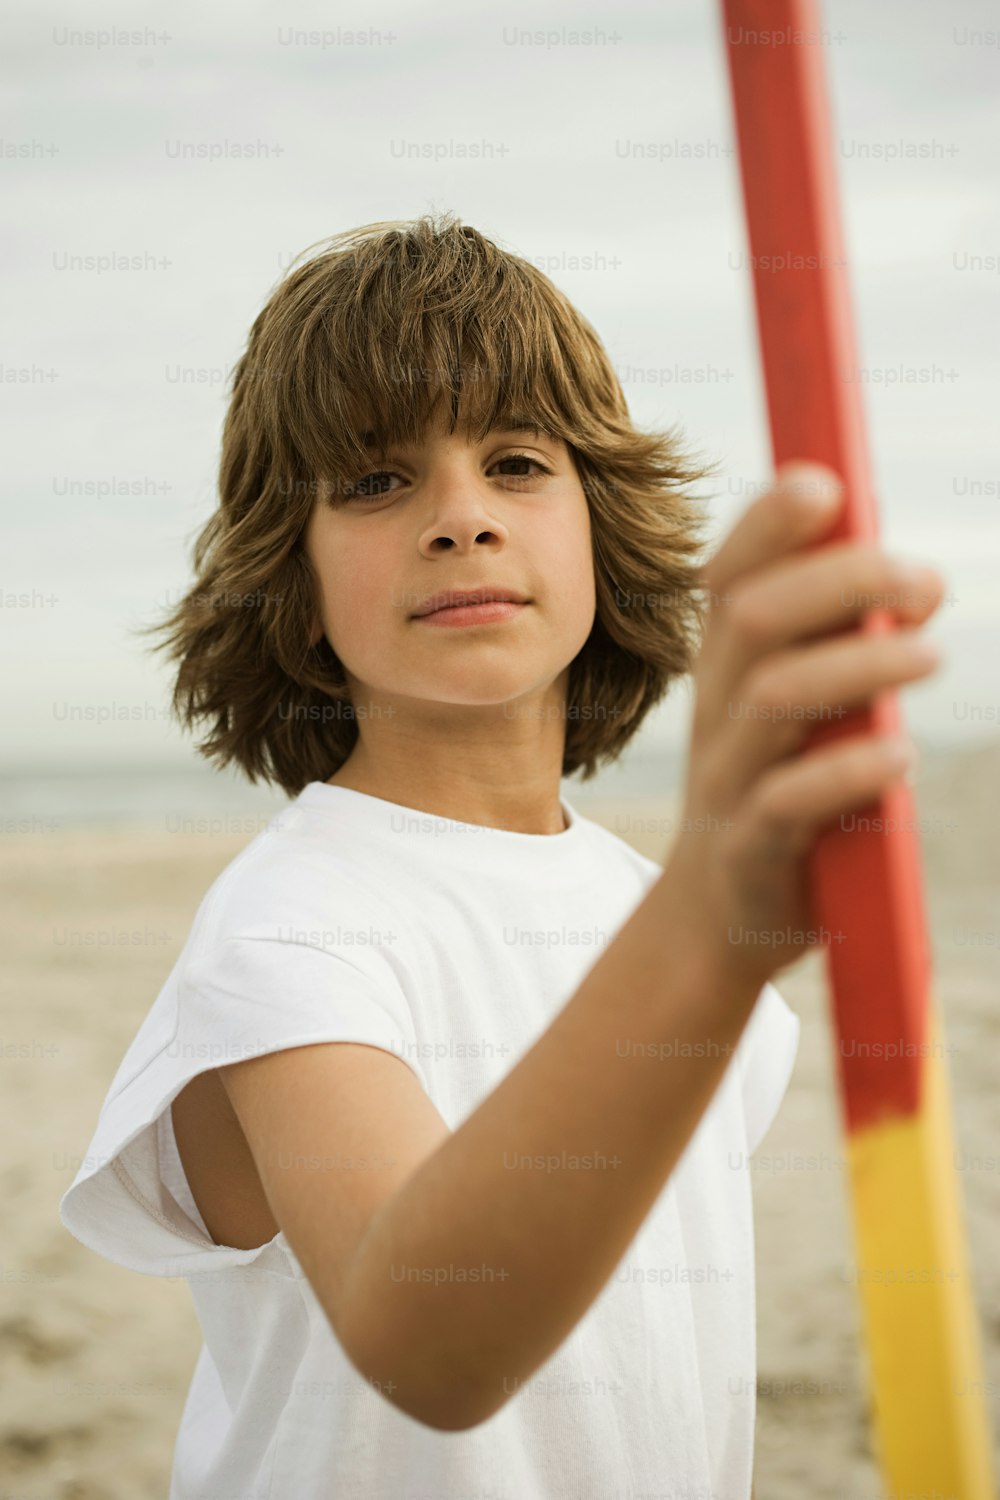 a young boy holding a red and yellow pole